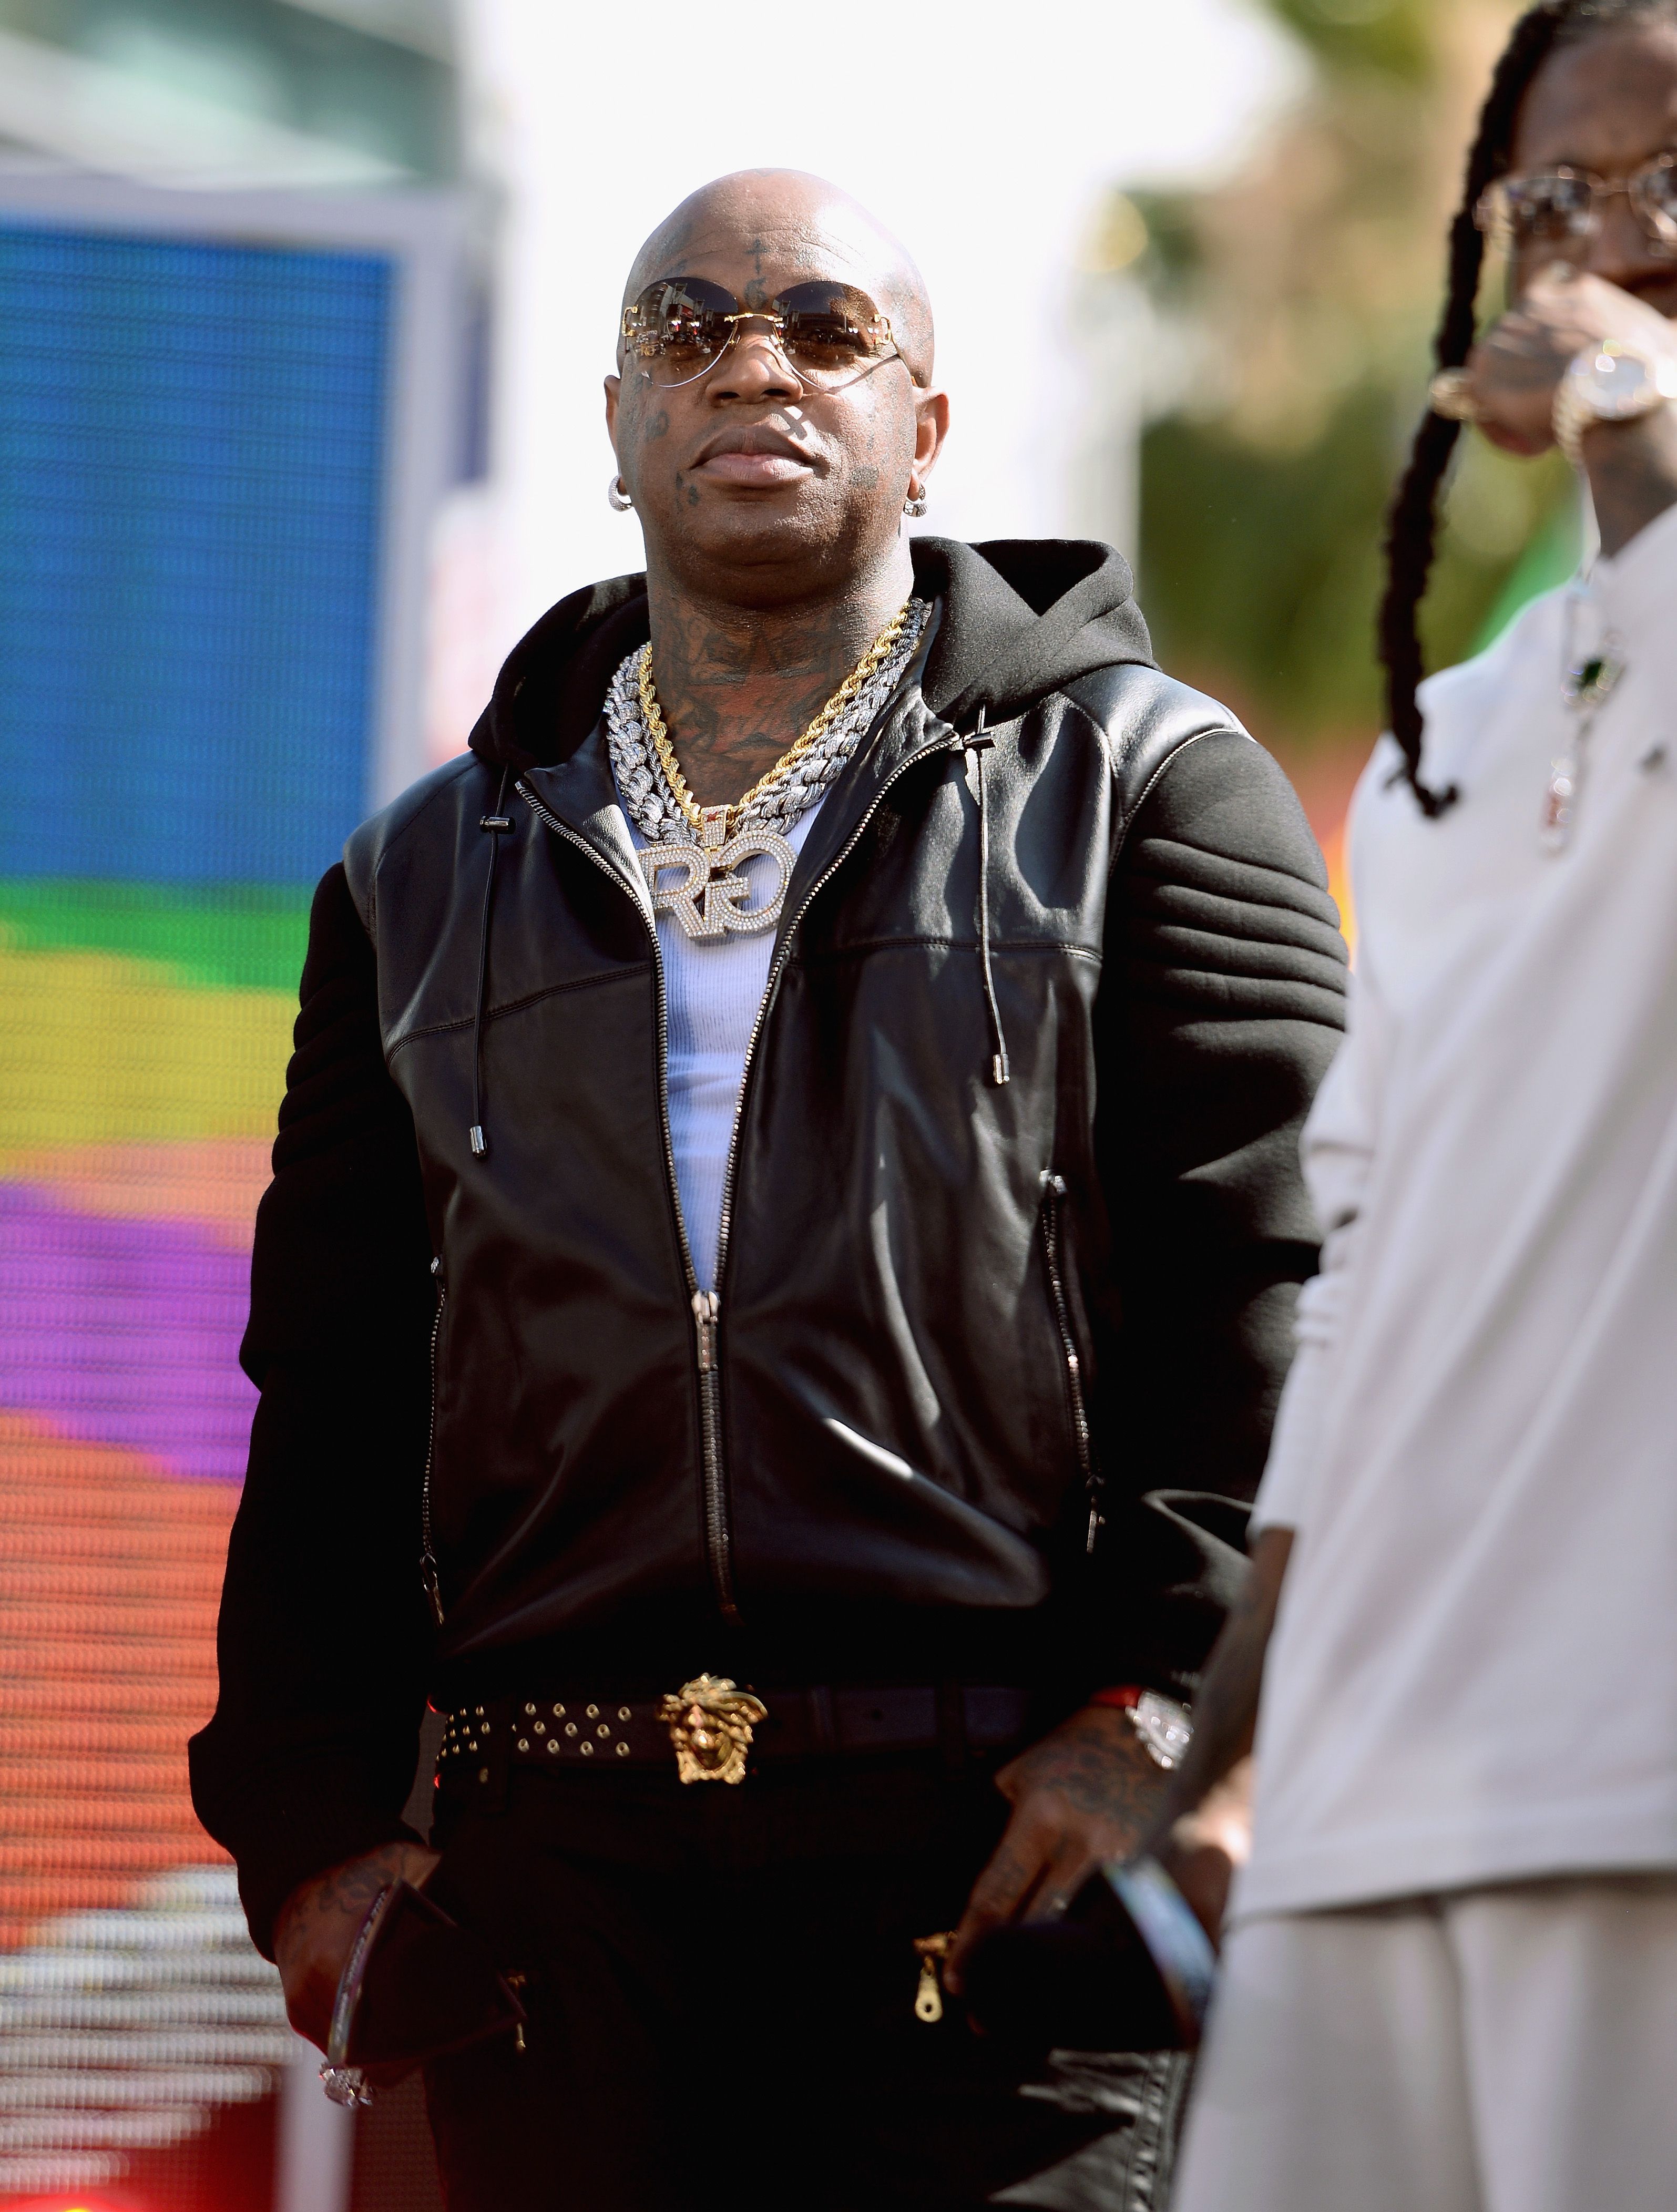 Birdman performed at 106 & Park Live sponsored by Denny's & M&M's during BET Experience at Microsoft Square on June 23, 2016 | Photo: Getty Images